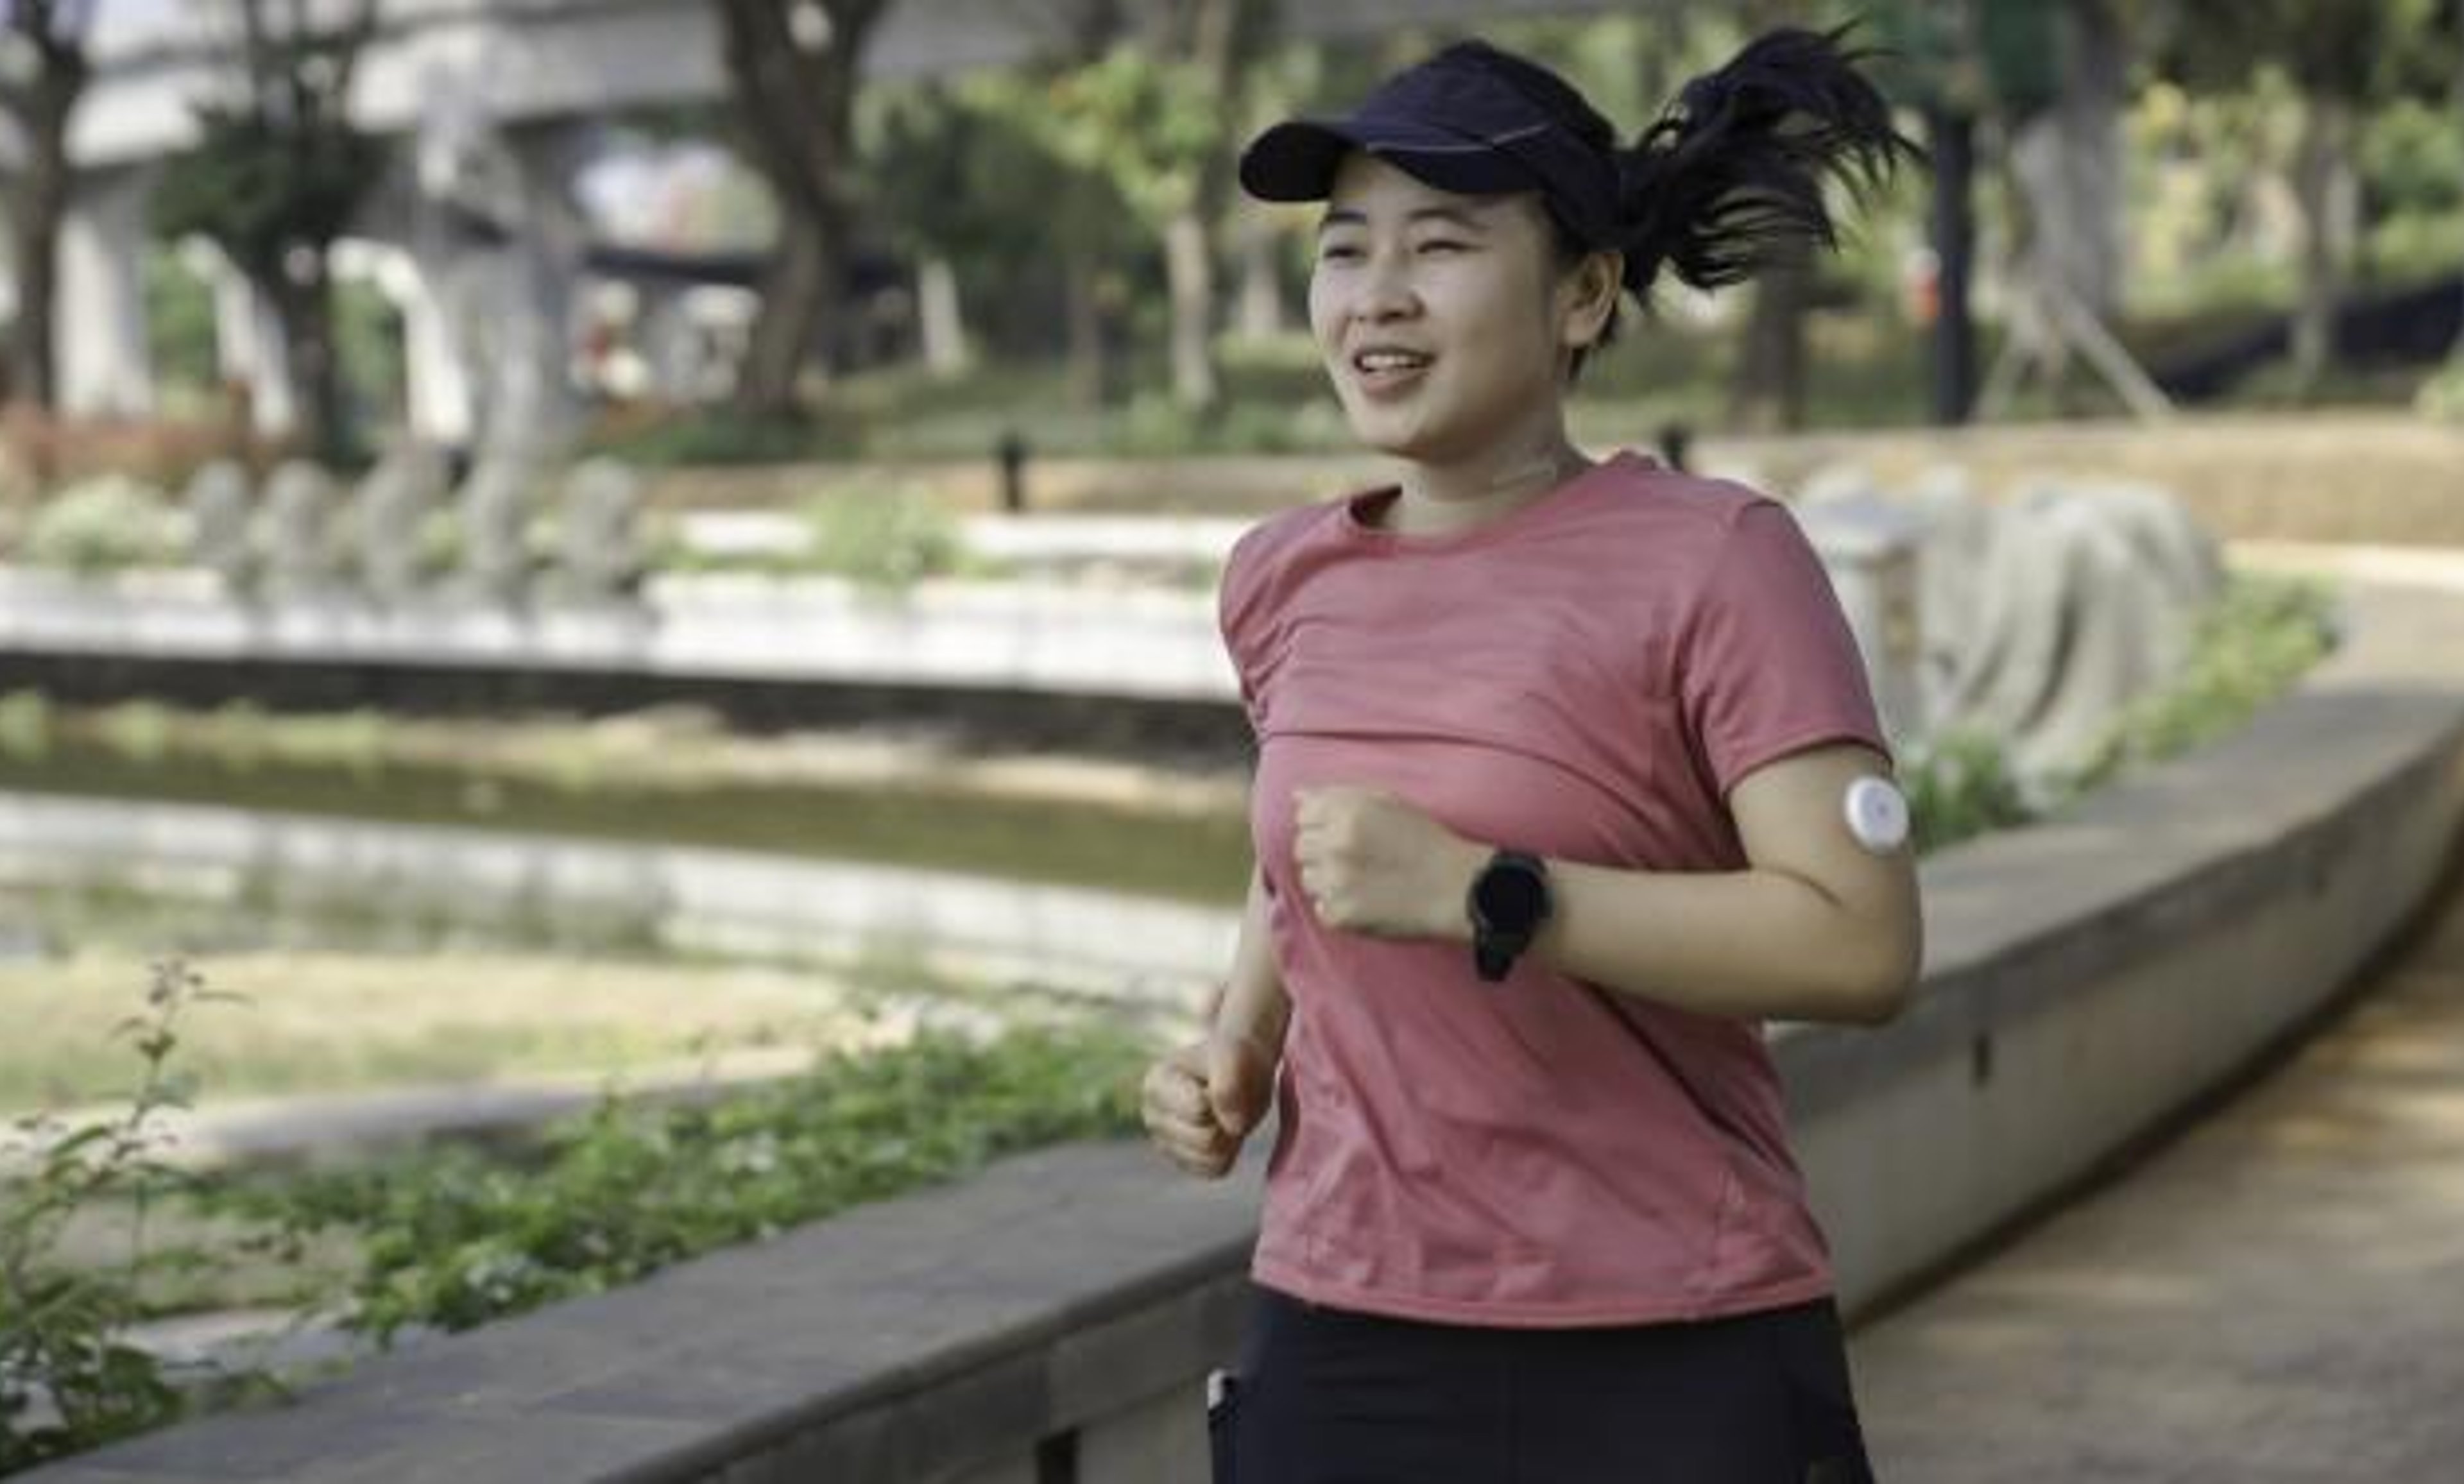 Asian Woman Running for Exercise